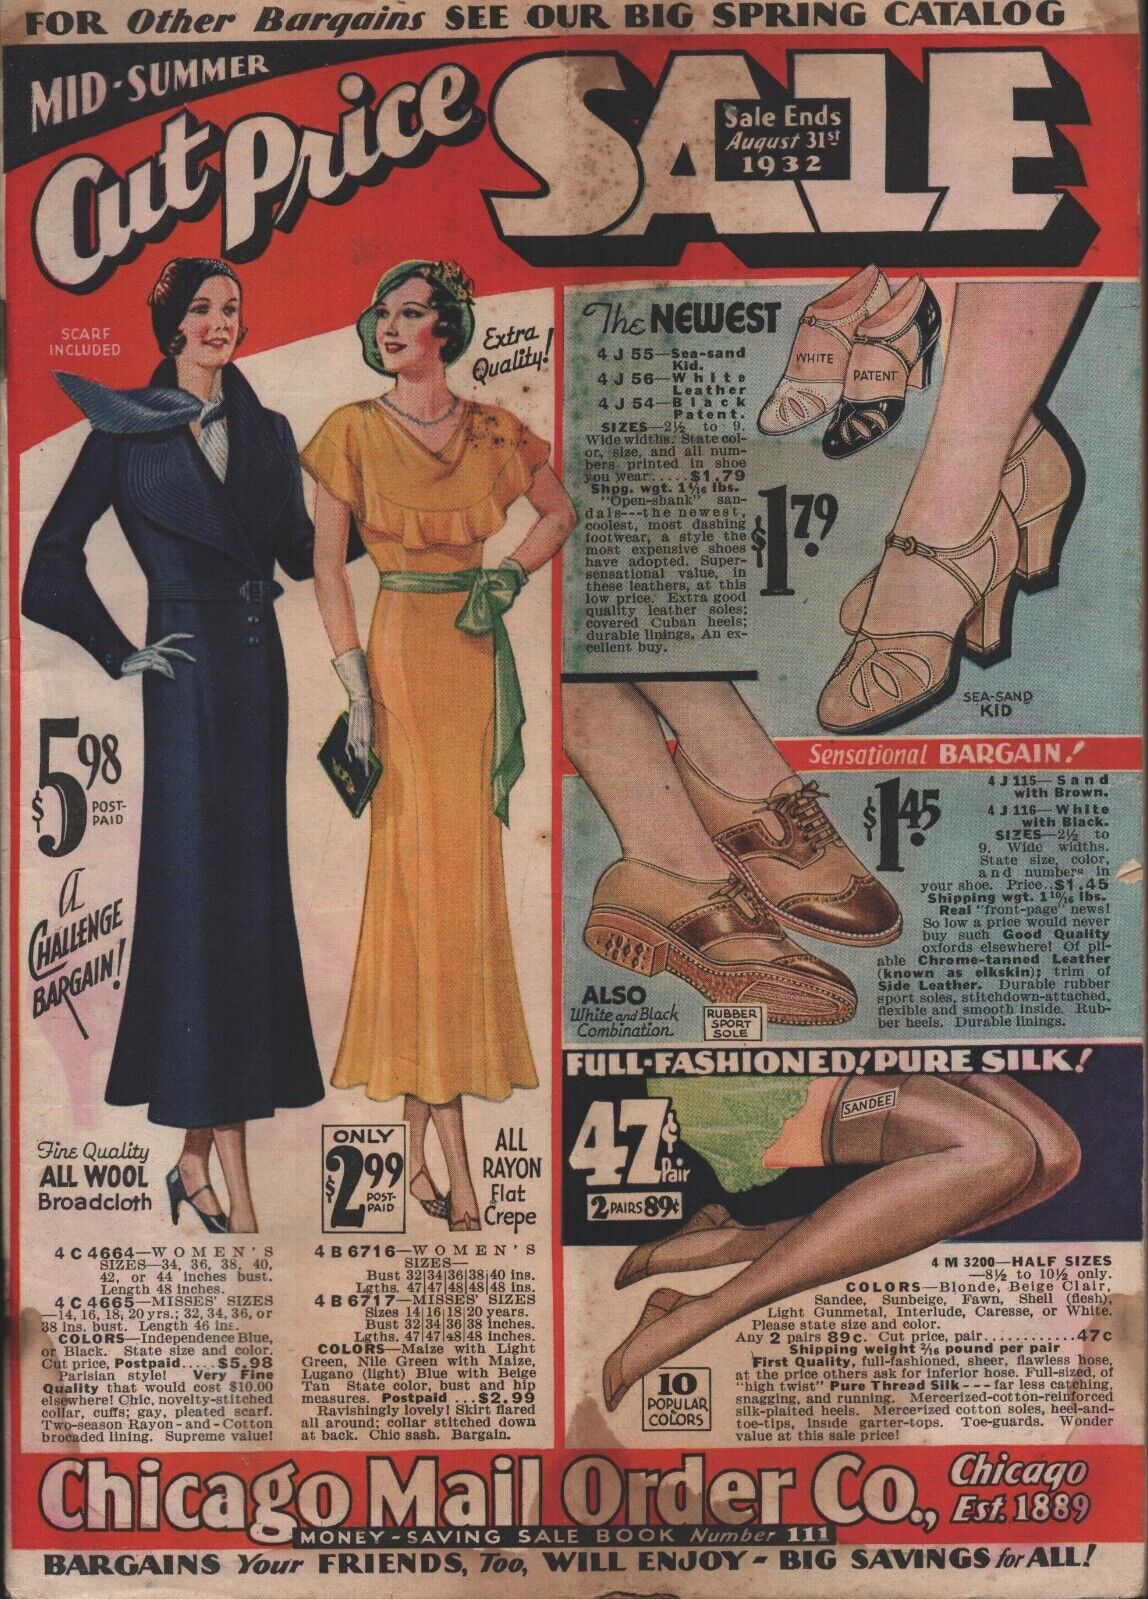 Chicago Mail Order Co. - Mid-Summer Cut Price Sale - 1932 - 114 Pages